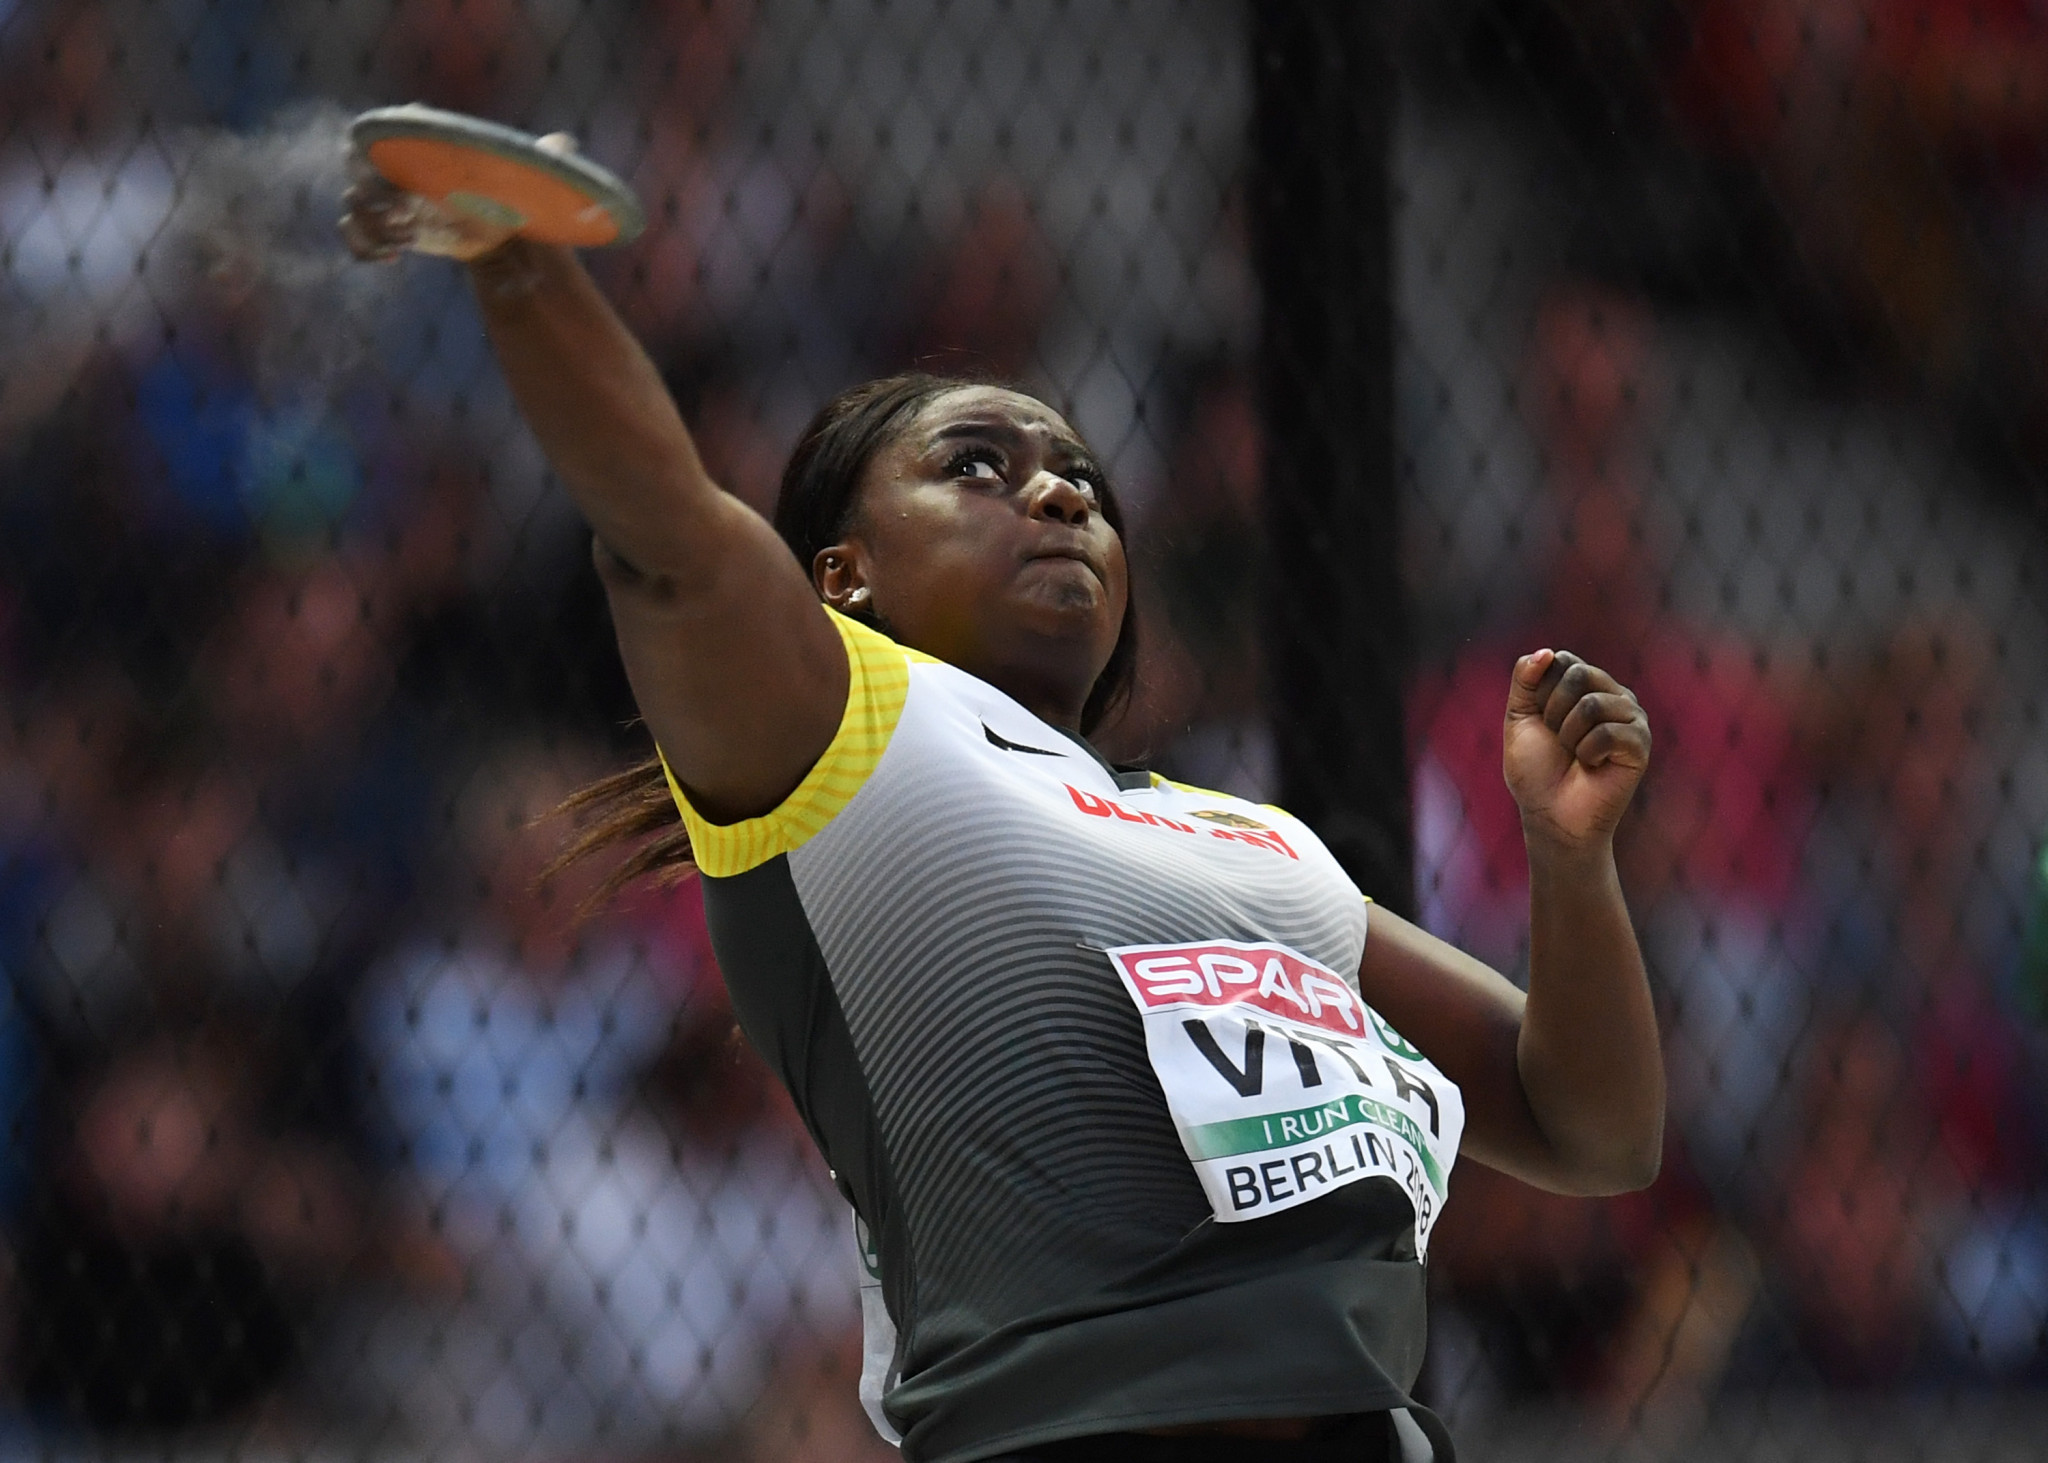 Claudine Vita secured 12 points for Germany by winning the women's discus final in Bydgoszcz ©Getty Images 